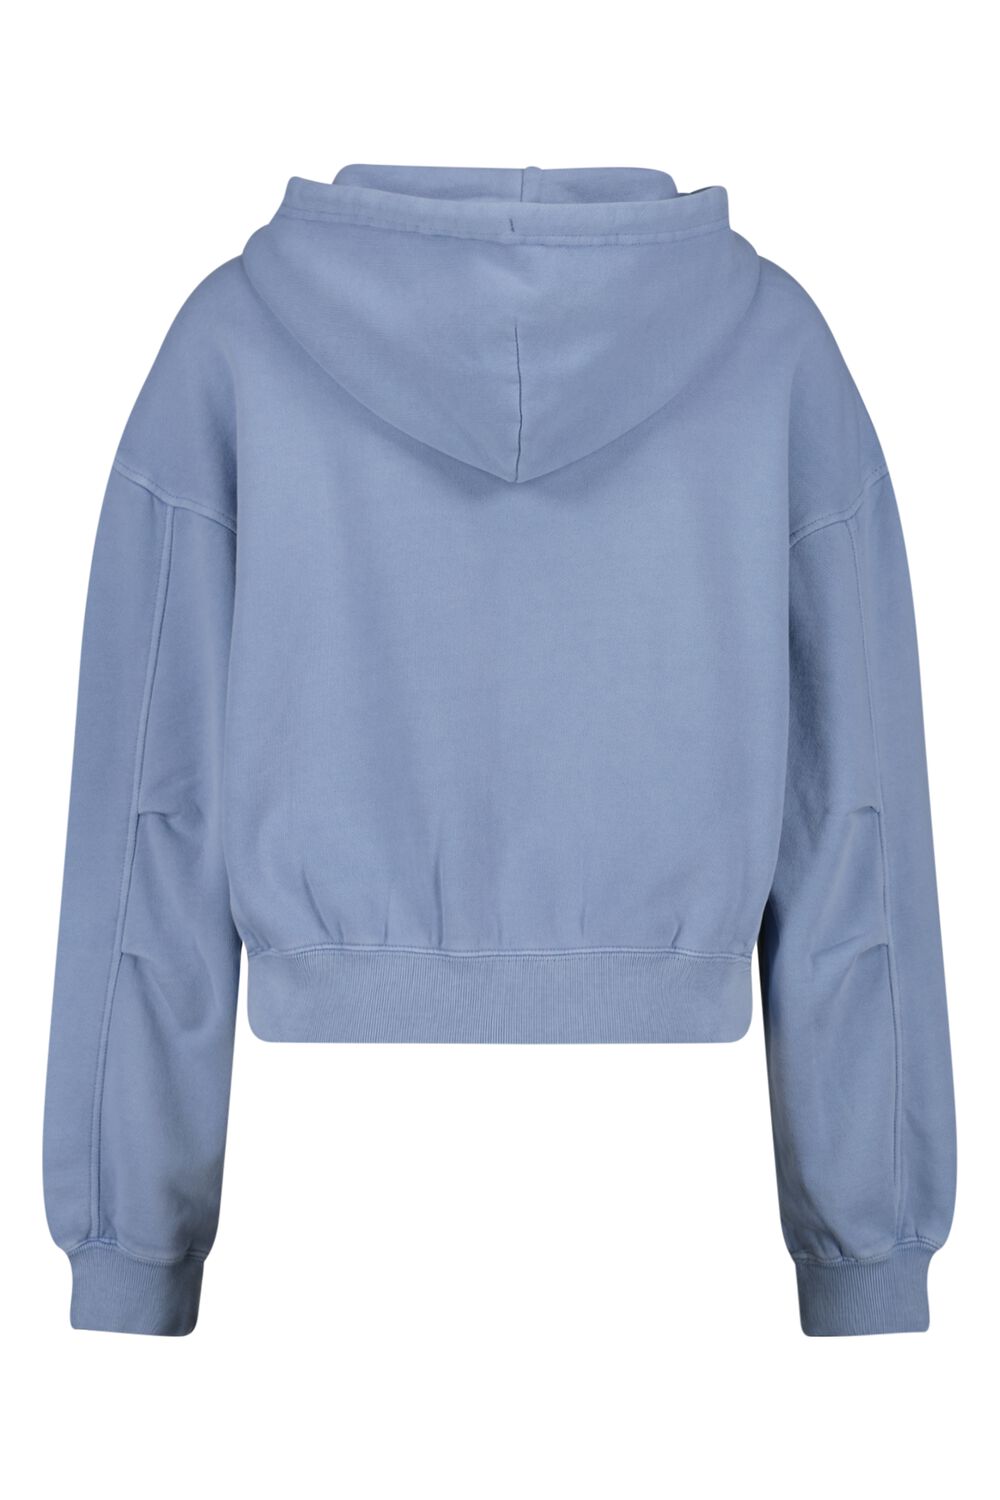 America Today Dames Hoodie Solly Blauw